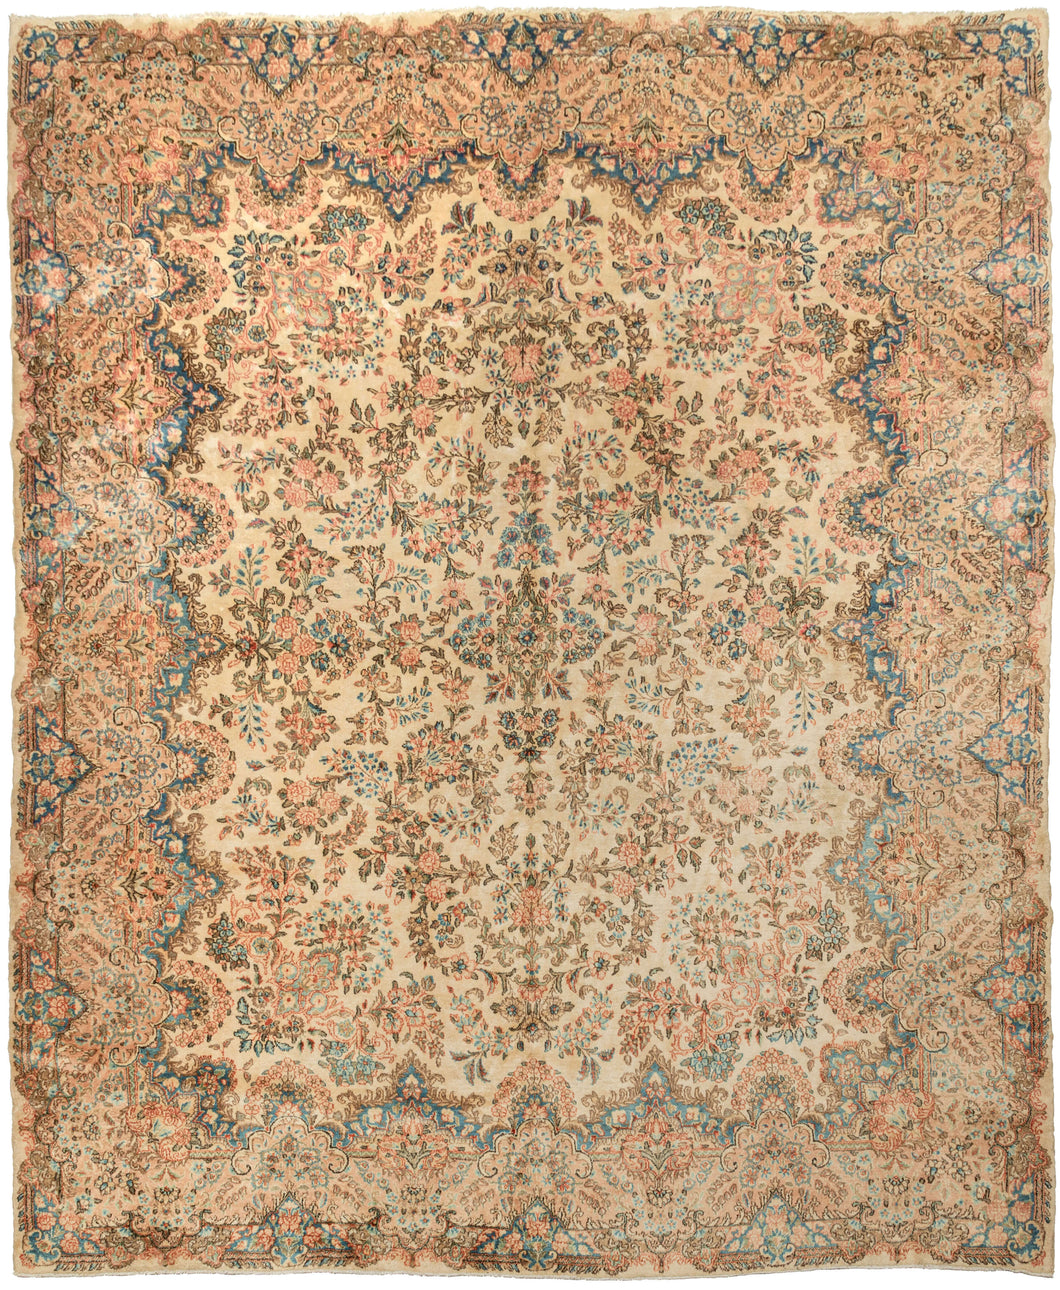 This Pastel Kerman Rug an elegant allover design of floral sprays in pastel pinks, reds, blues, browns, and gold and on a sandy khaki ground. It is framed by a wide border in the same tones of various bouquets that enter the field along its scalloped edges.